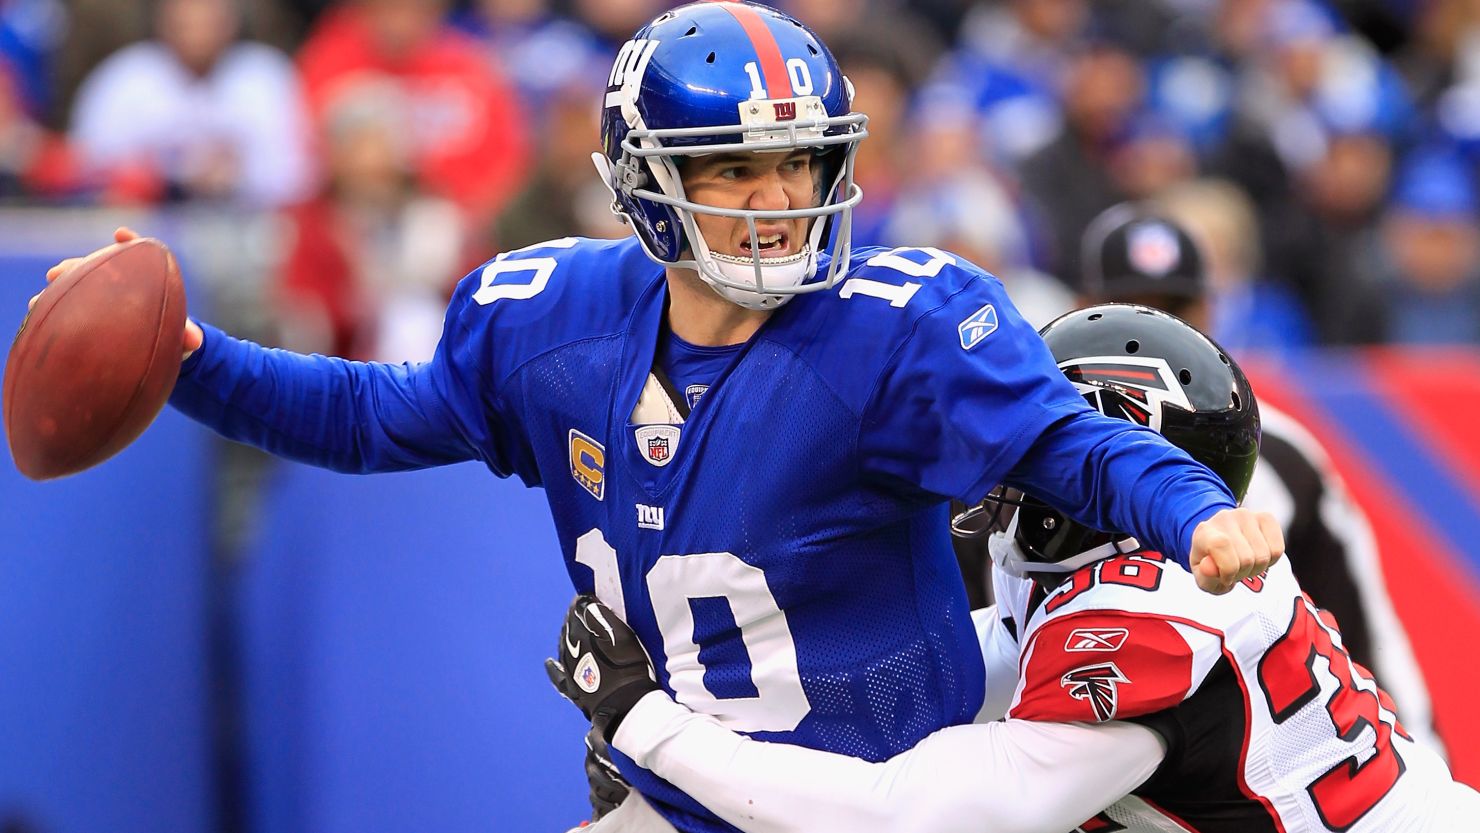 Eli Manning will lead  the New York Giants against the San Francisco 49ers in Sunday's NFC championship game